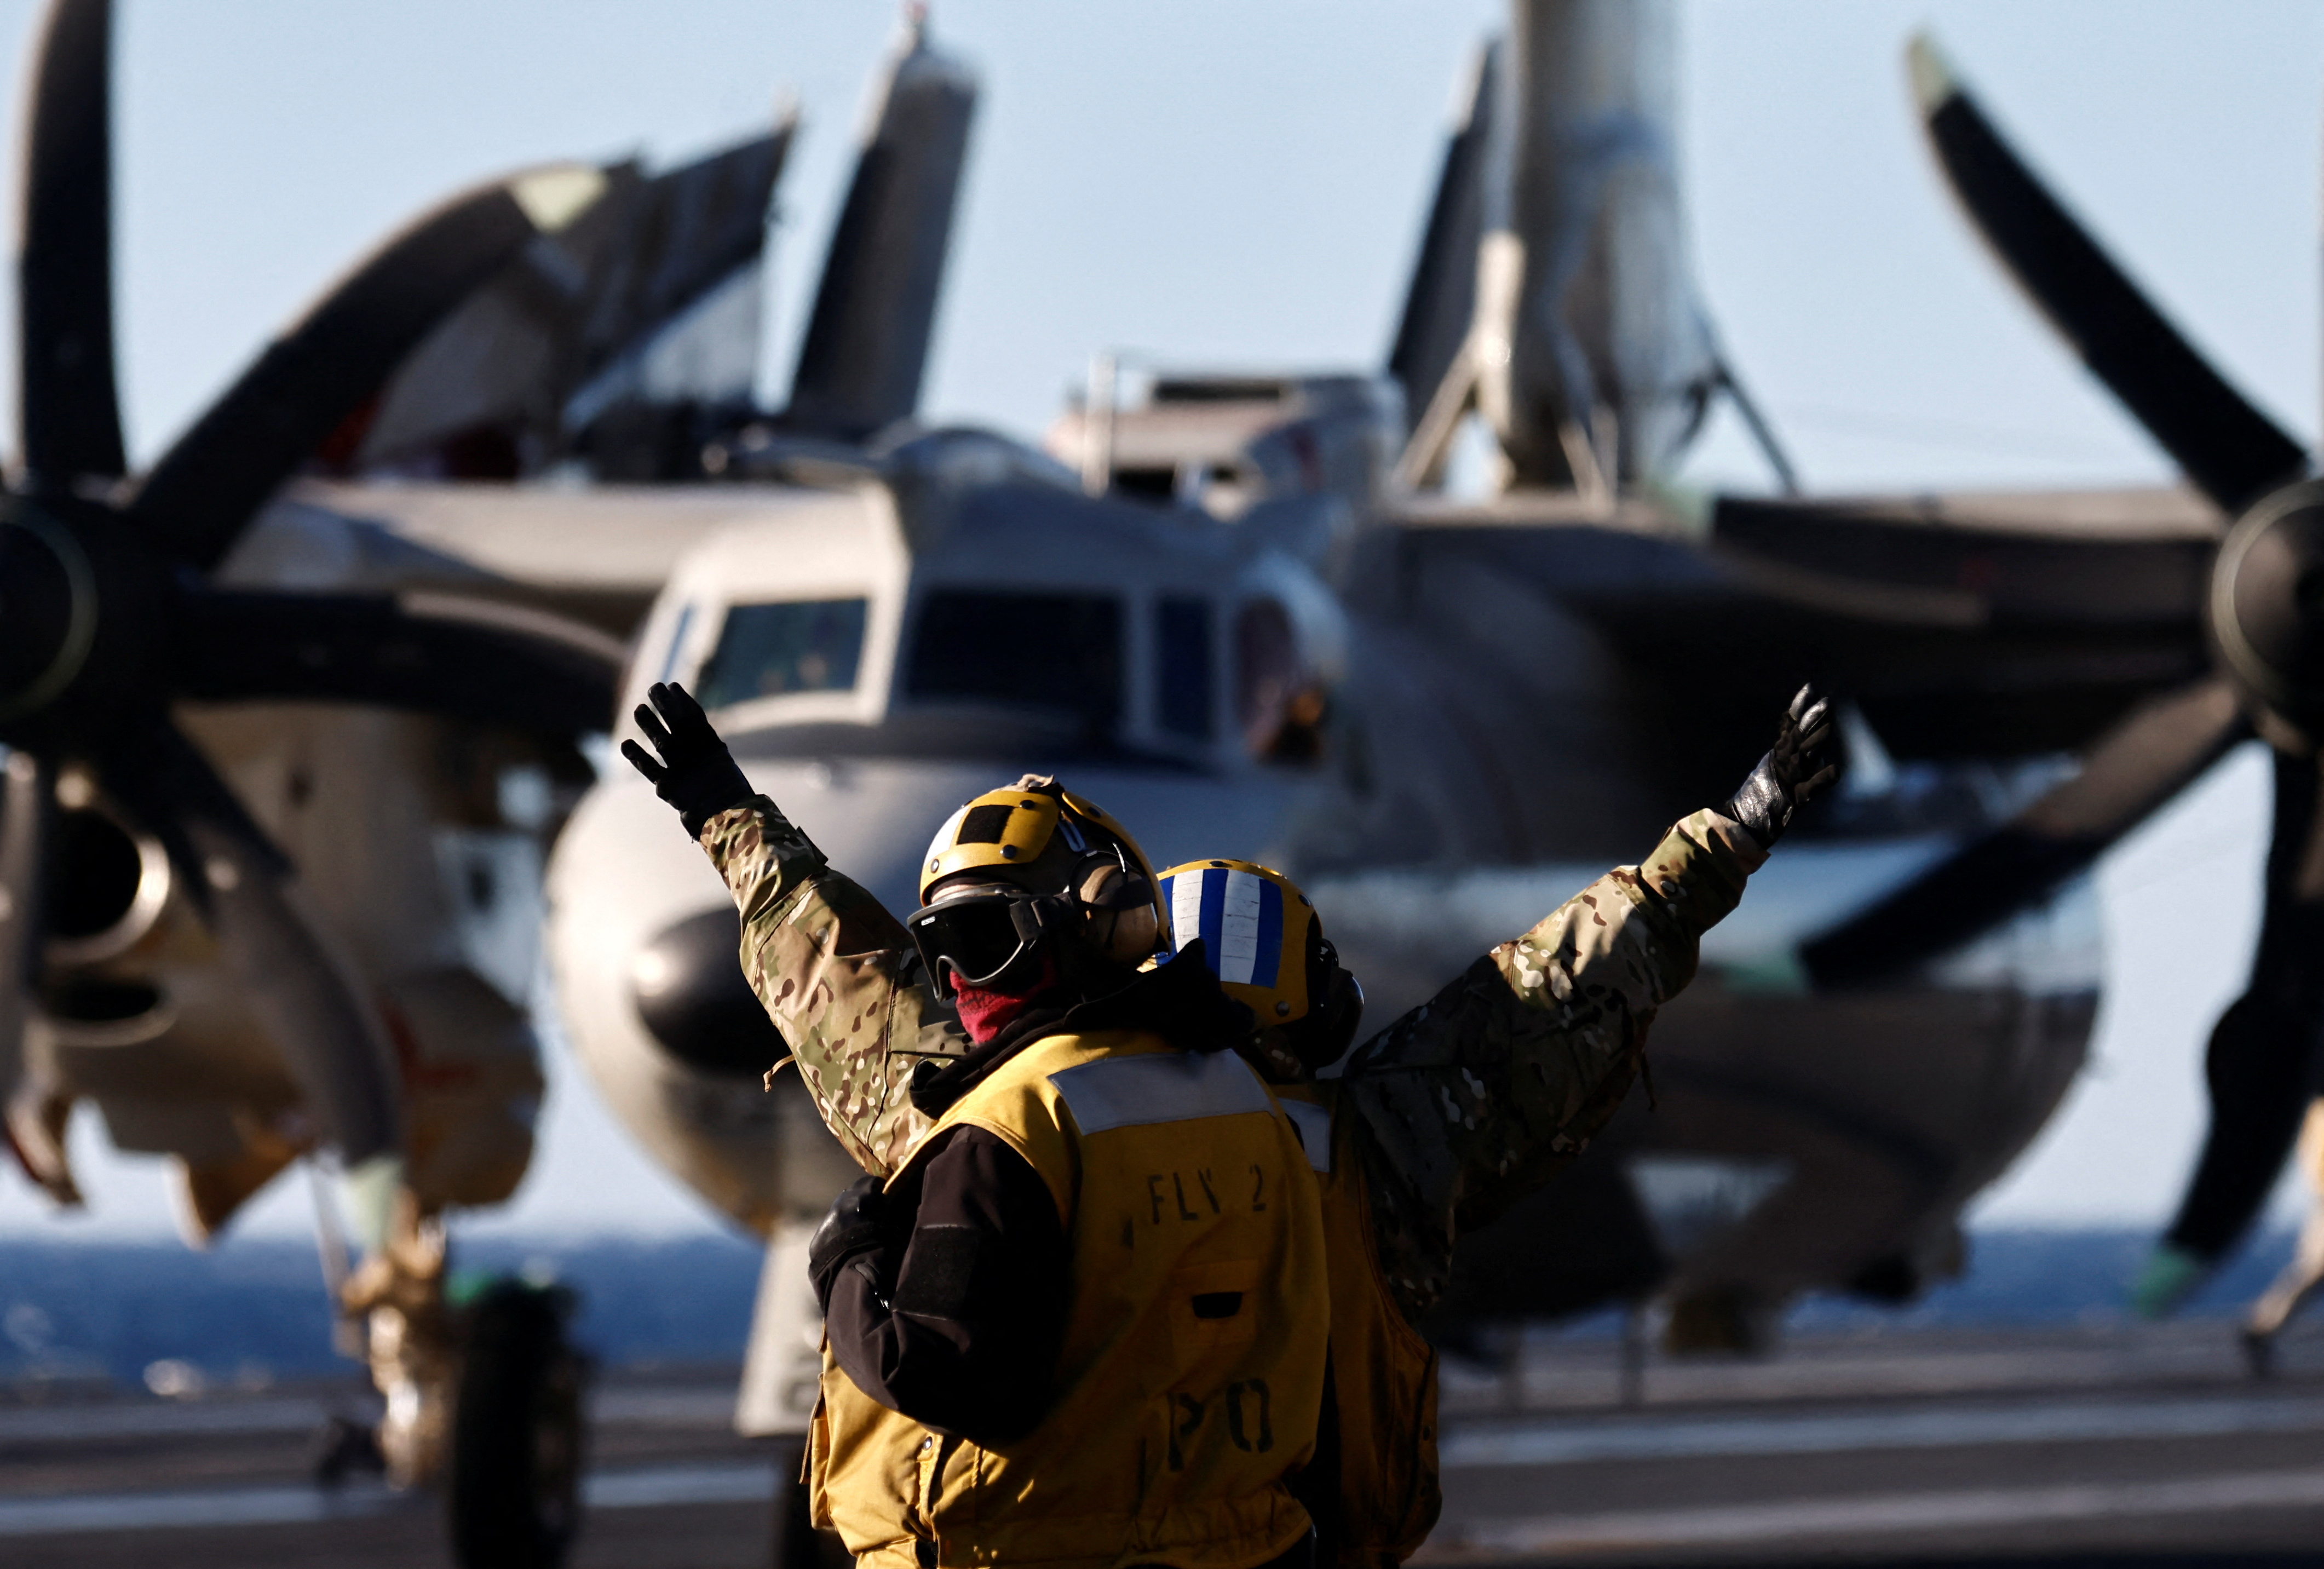 Onboard a U.S. aircraft carrier in times of Ukraine/Russia tensions